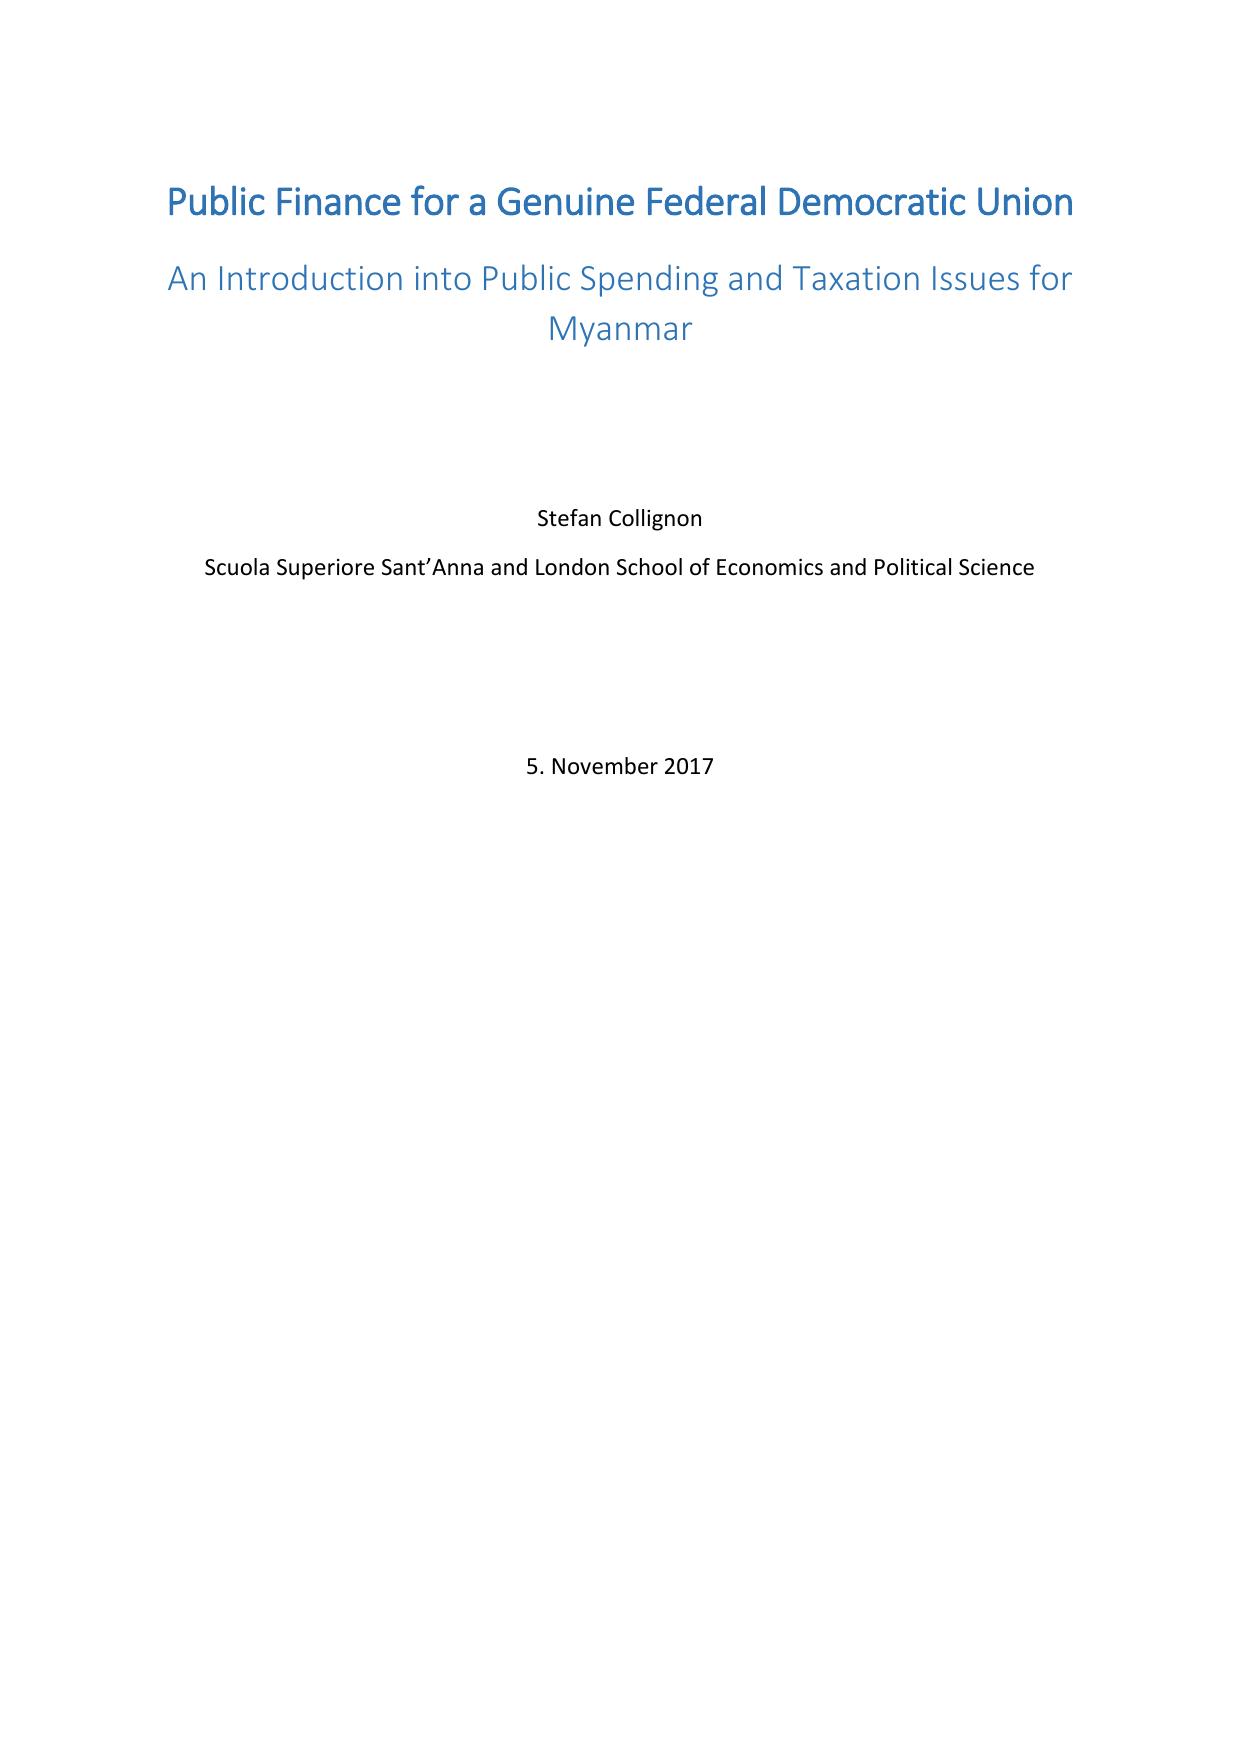 An introduction into public finance and taxation issues for Myanmar policy makers